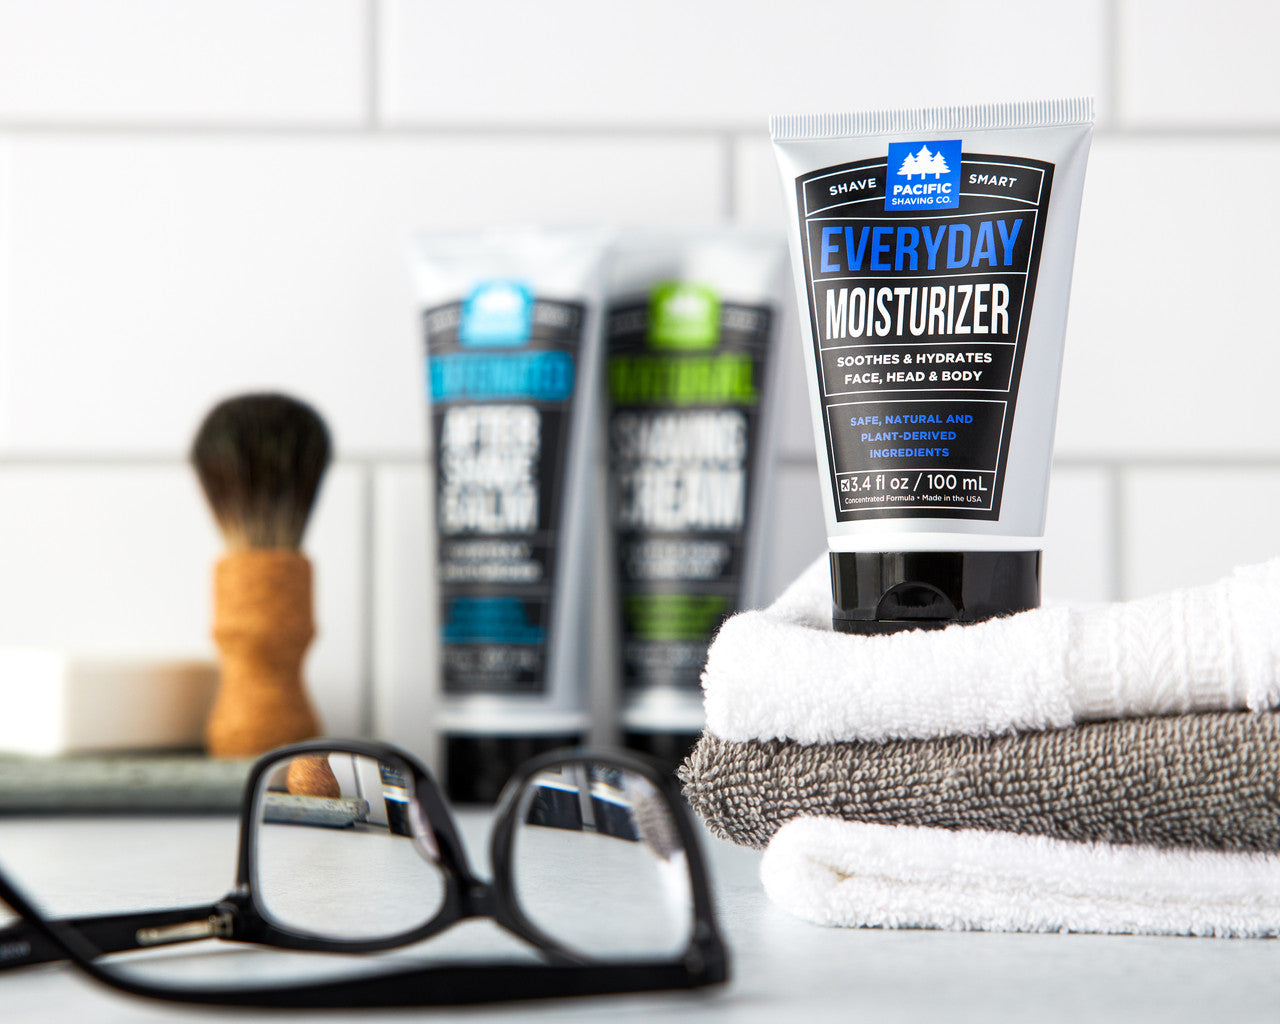 Everyday Moisturizer by Pacific Shaving Company. Treat yourself to our lightweight, post-shave miracle. Its unique blend of natural and potent moisturizers and antioxidants lets you skip the stinky stuff, and keeps your skin hydrated and healthy all day.